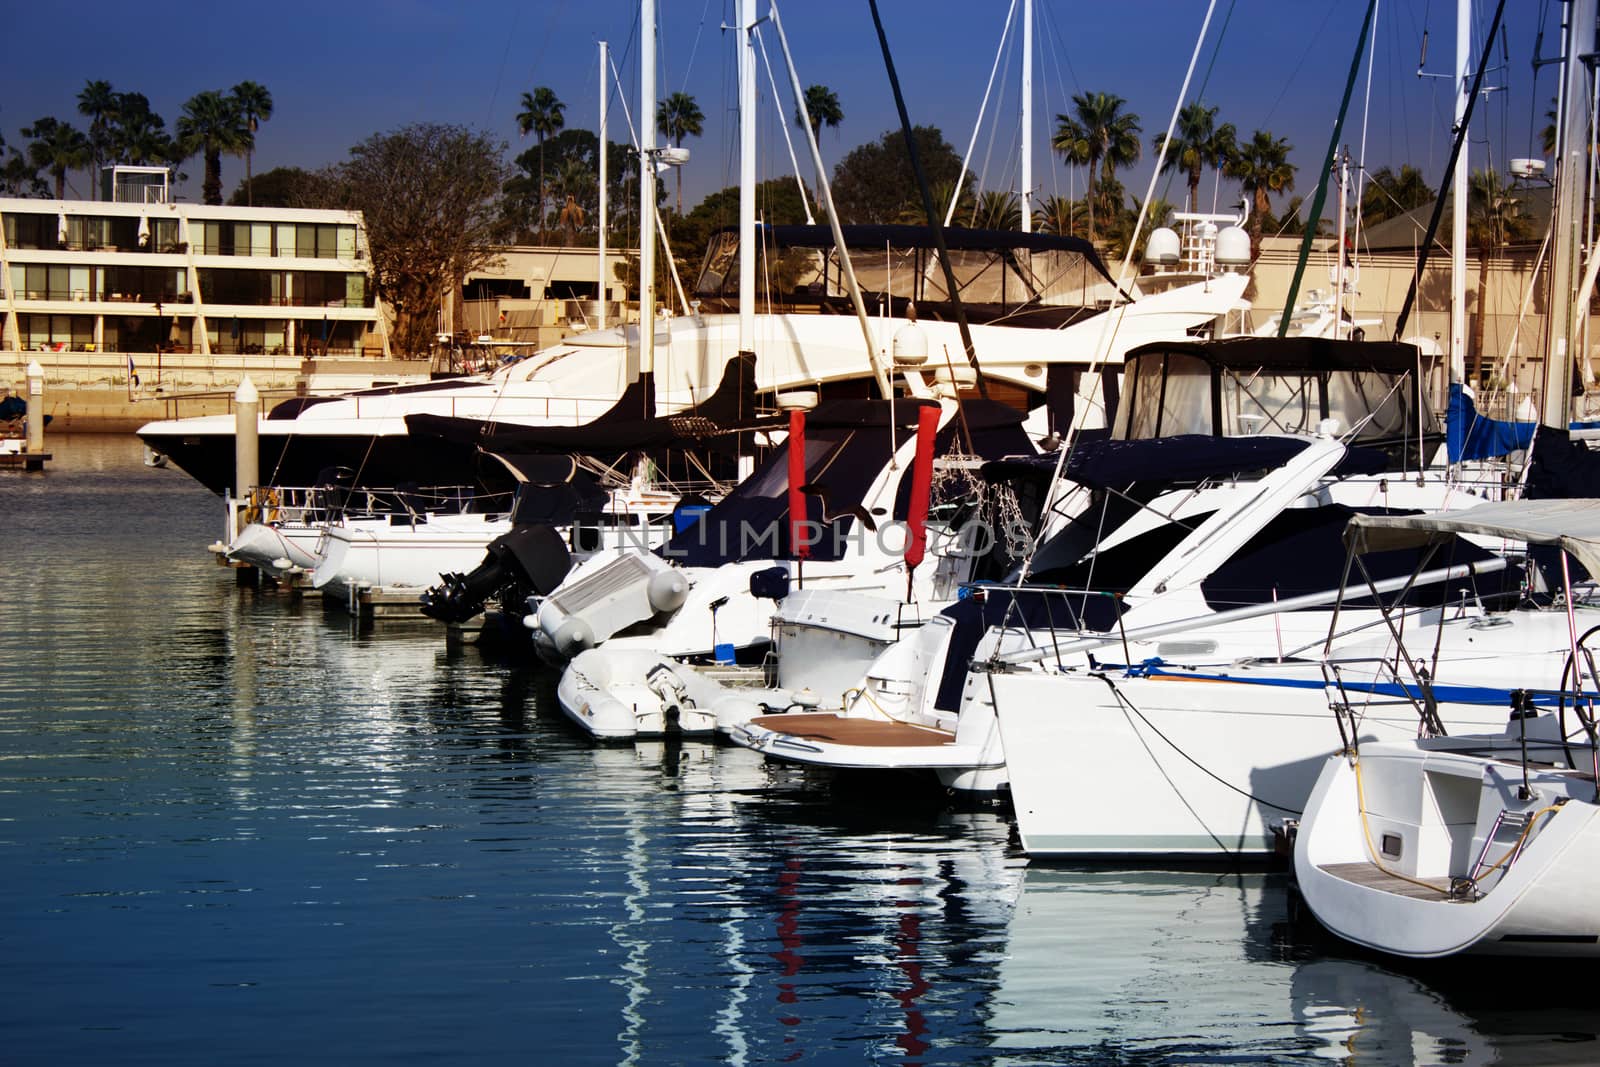 A sailboat harbor with a large number of sailing boats in the marina Marina del Ray in Los Angeles.